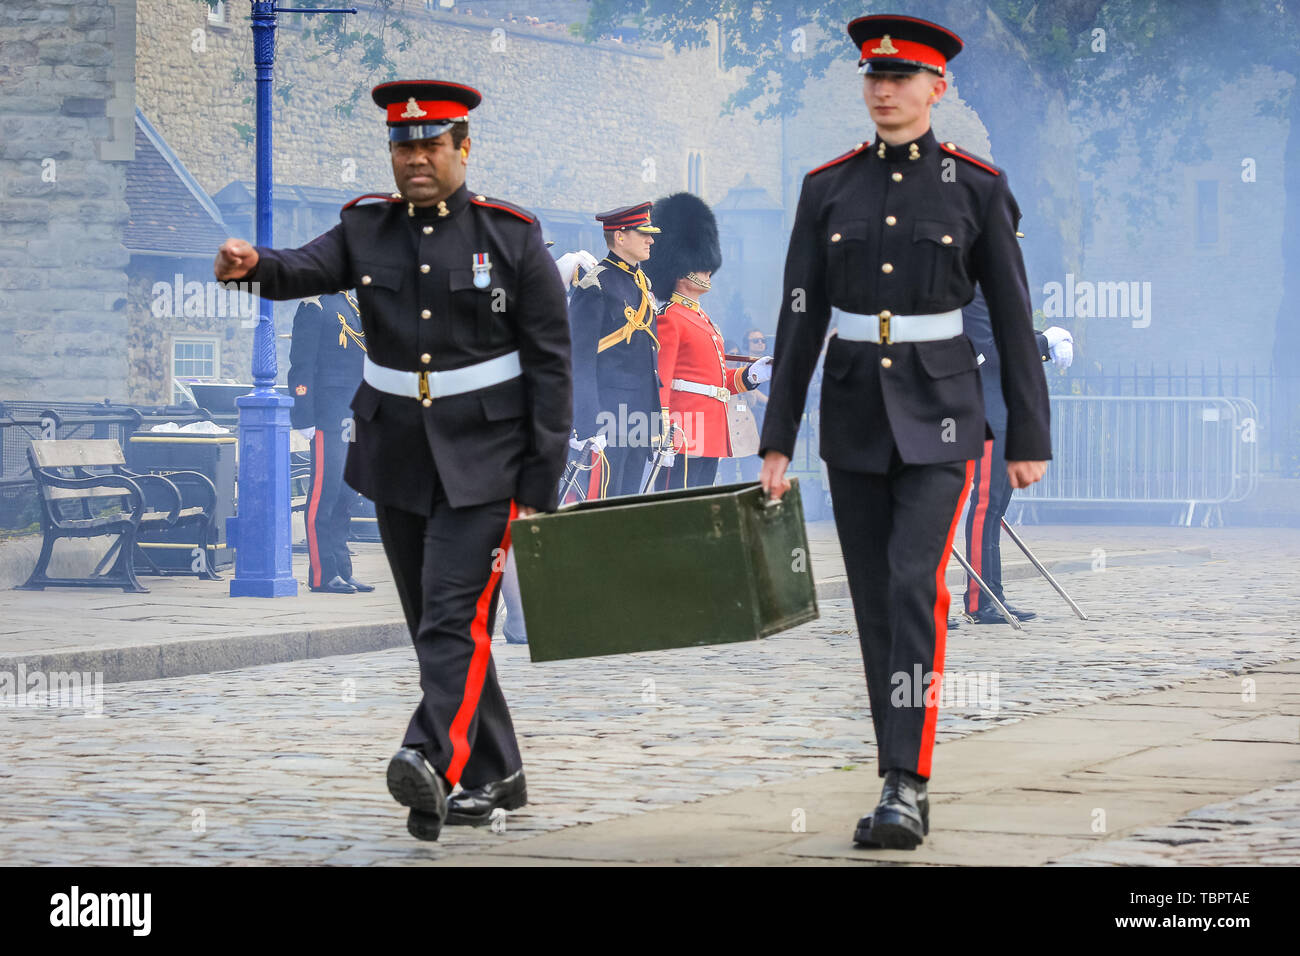 London, UK, 03rd June 2019. A cartridge case is being carried by soldiers. A 103 round gun salute by the Honourable Artillery Company at HM Tower of London is fired at midday. The 103 rounds are:  41 to mark 66 years since HM The Queen’s coronation, 41 to mark the state visit of the President of the United States, and 21 for the City of London. Credit: Imageplotter/Alamy Live News Stock Photo